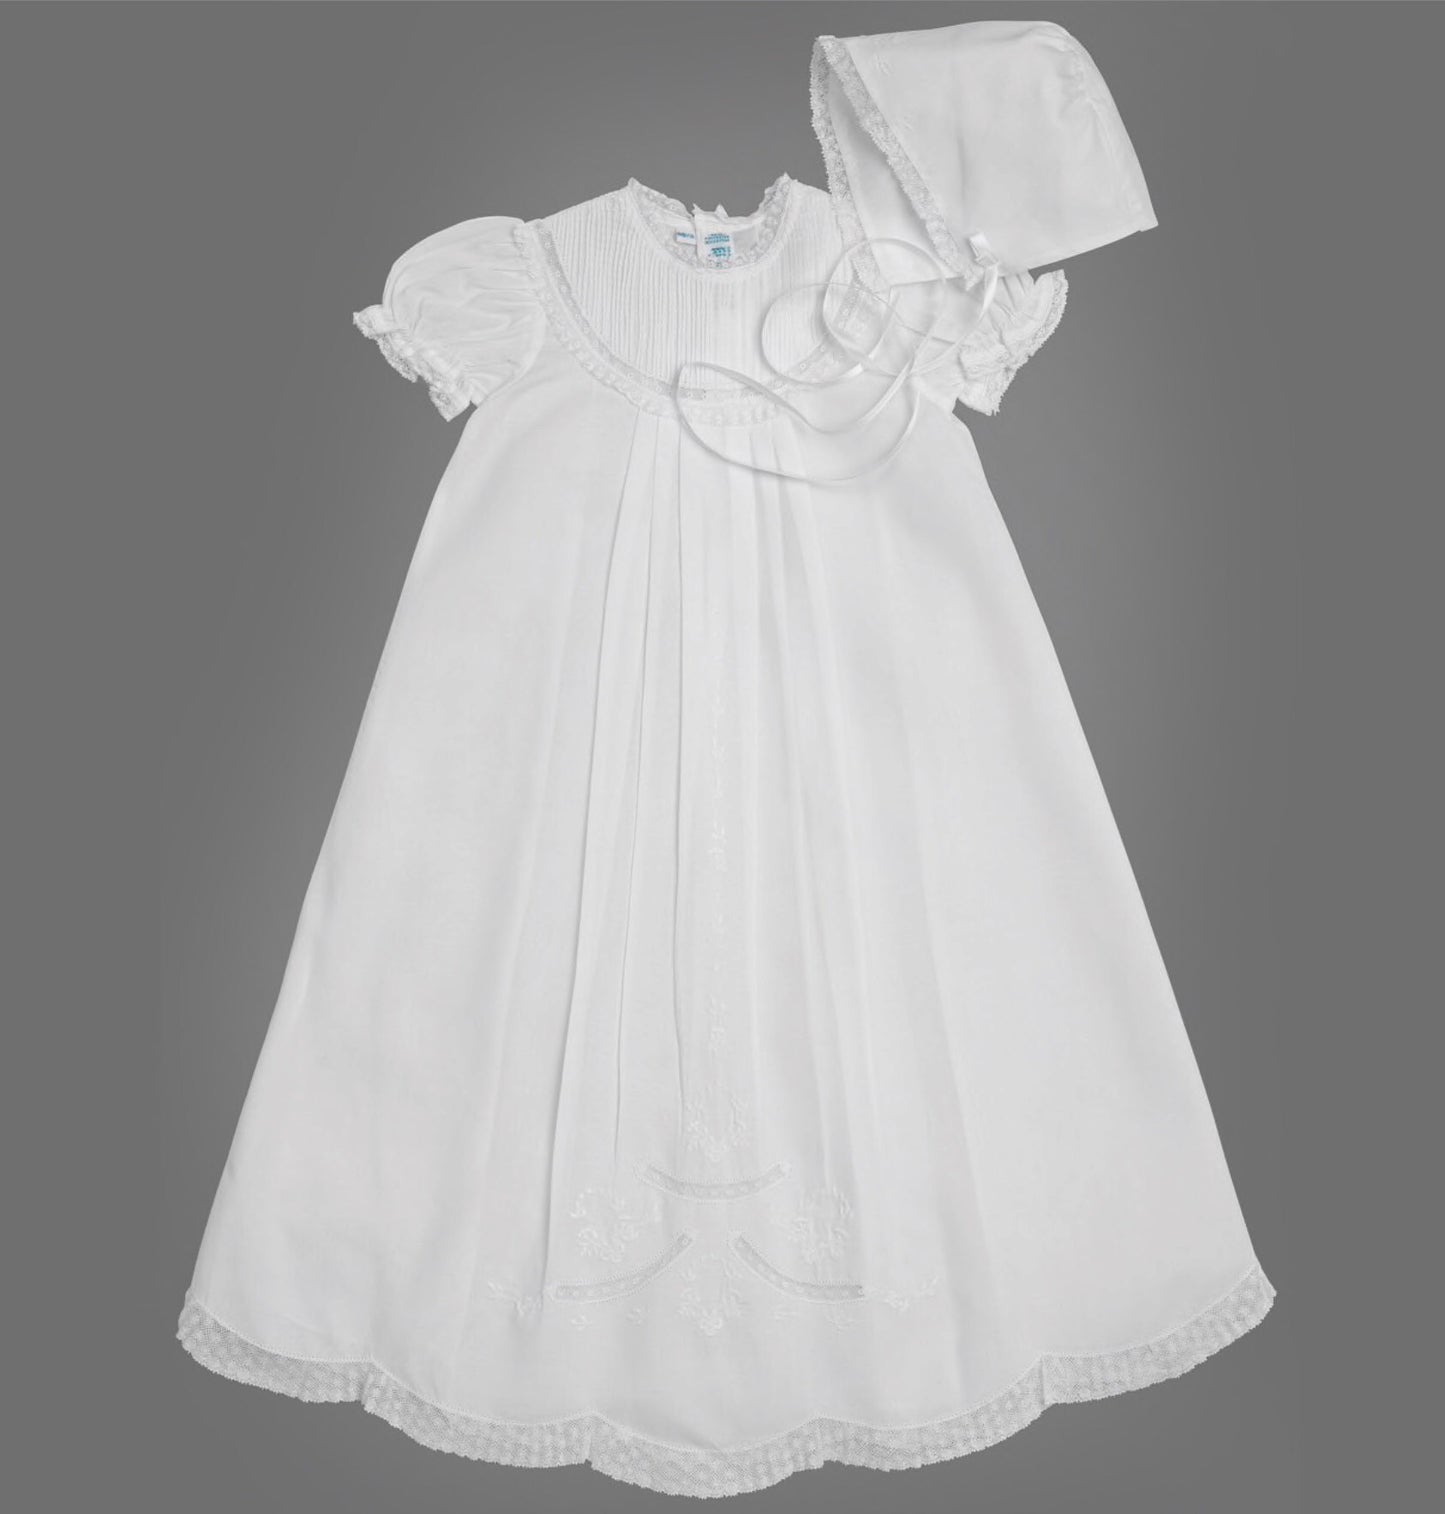 Pintucked Yoke Special Occasion Set for Girls  - Doodlebug's Children's Boutique